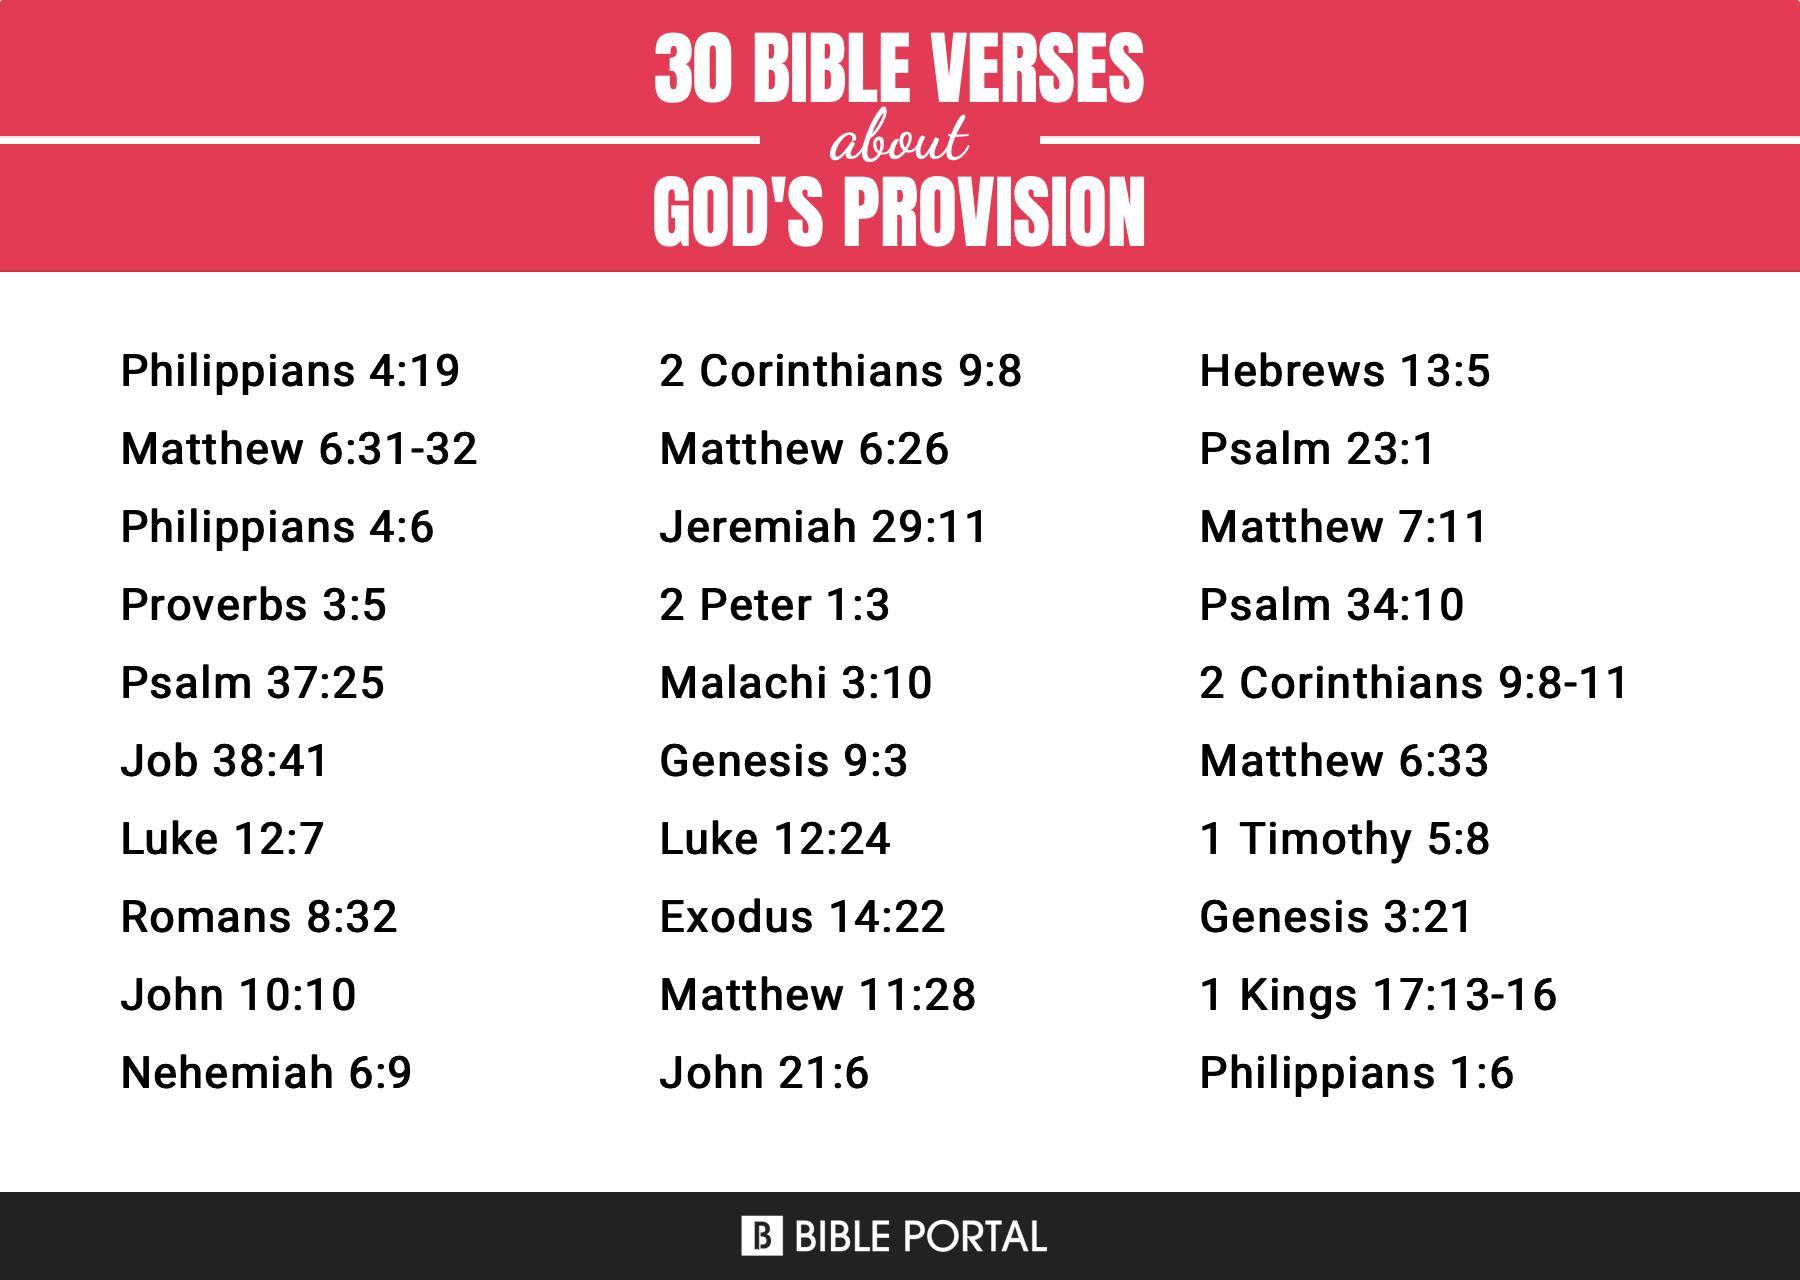 What Does the Bible Say about God's Provision?